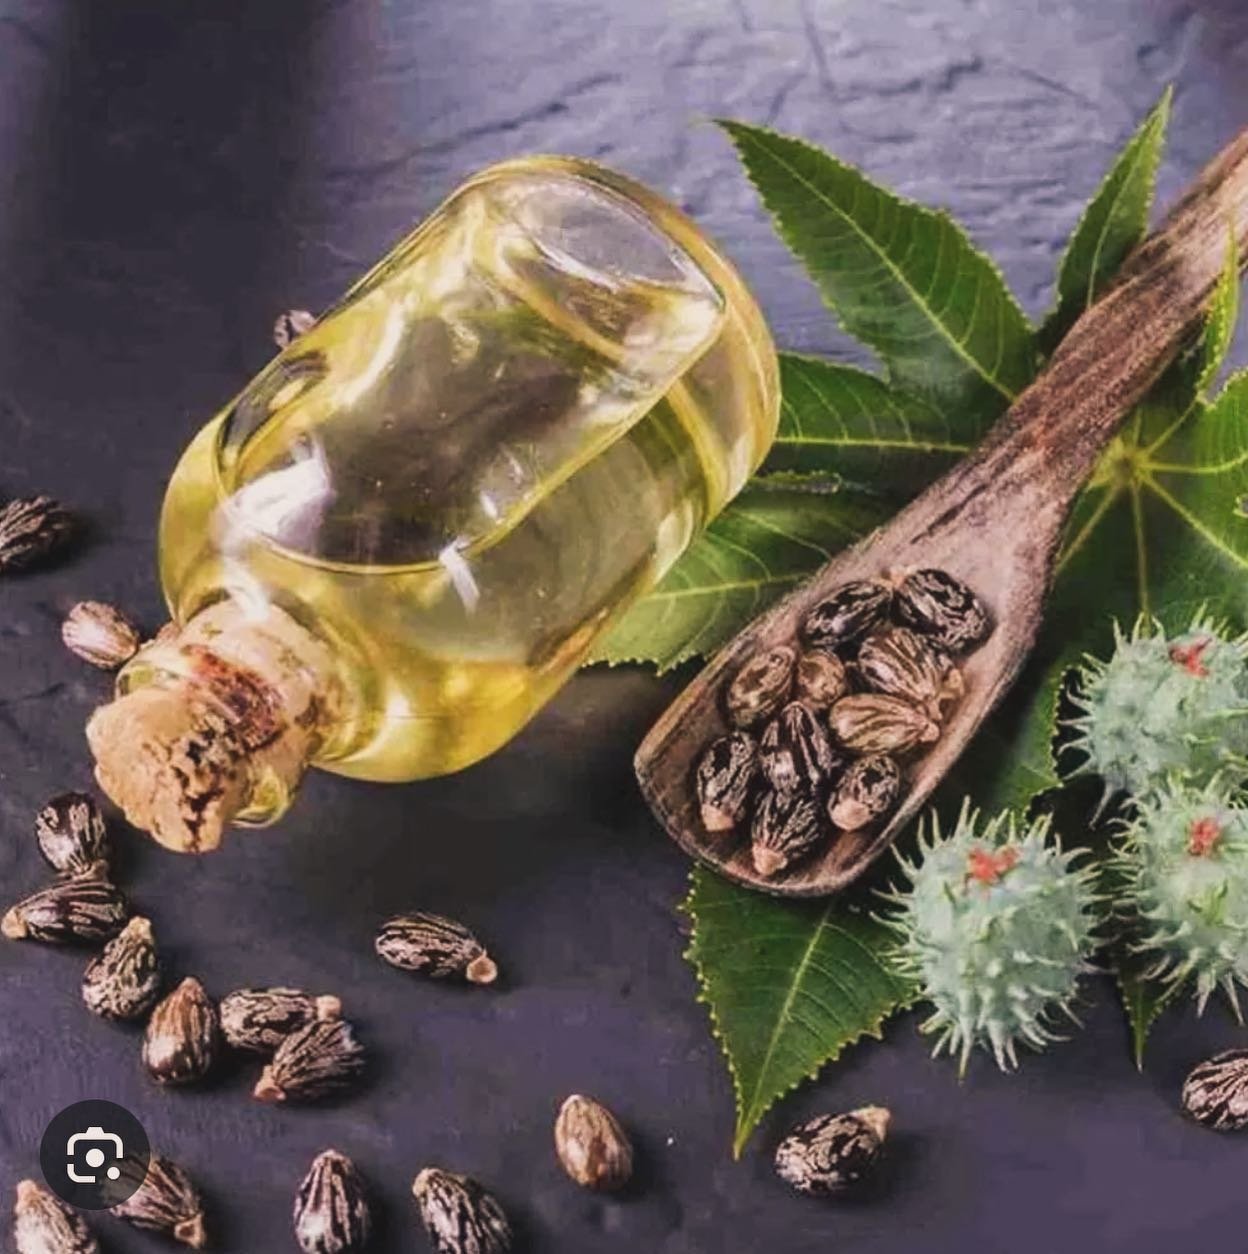 The Oil Cleansing Method 🌸🌿

Our favourite way to cleanse is with oils and especially the Castor oil - Palm ✋ of Christ or&rsquo; Palms Christi&rsquo; this has a multitude of healing benefits and a natural affinity with the yin waters of our lymph 